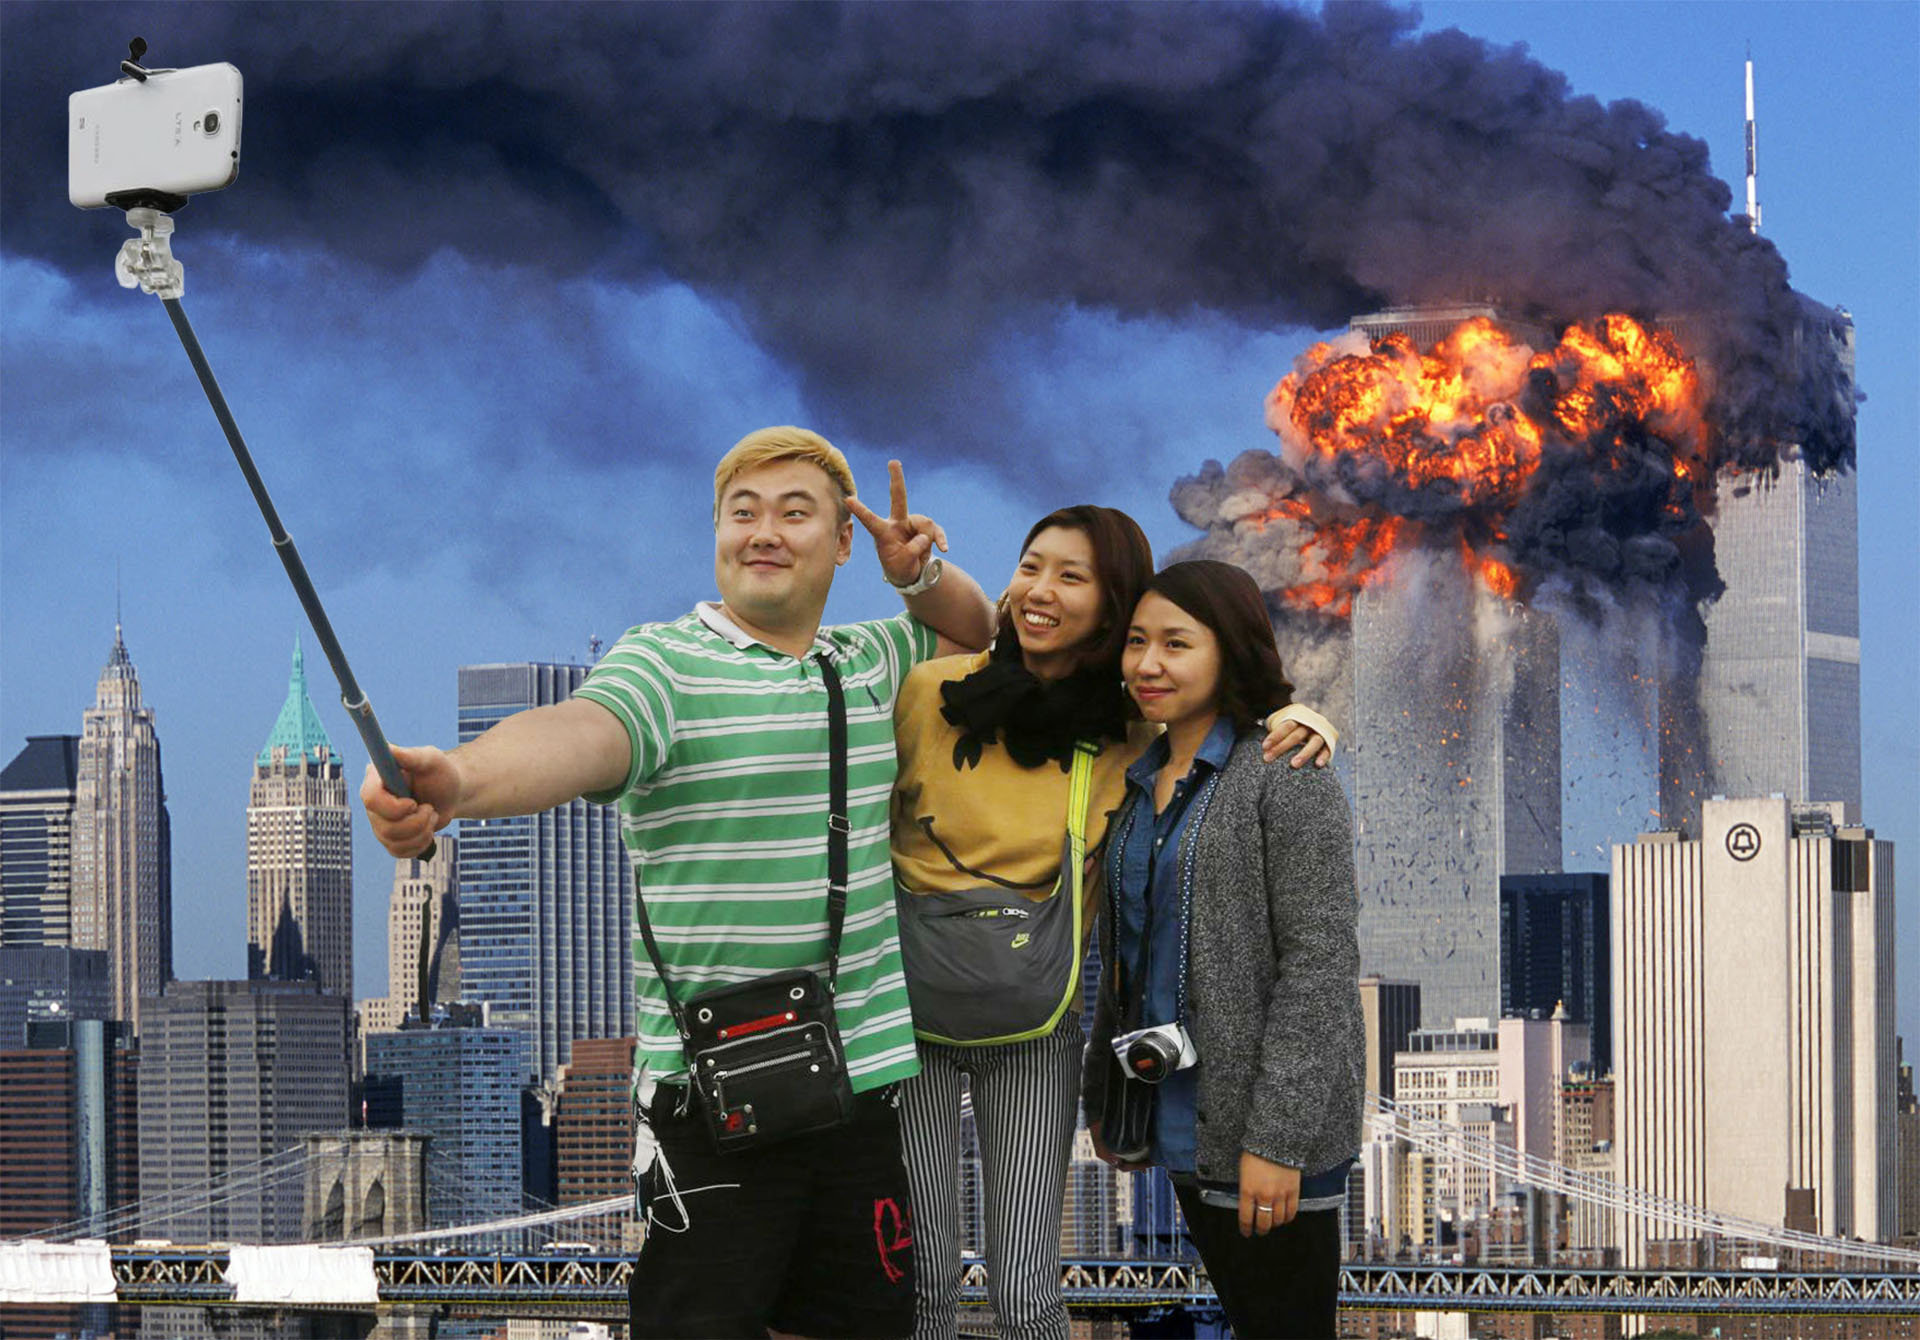 A montage of three people taking a selfie, pasted on to a picture of the Twin Towers on fire on September 11th 2001.